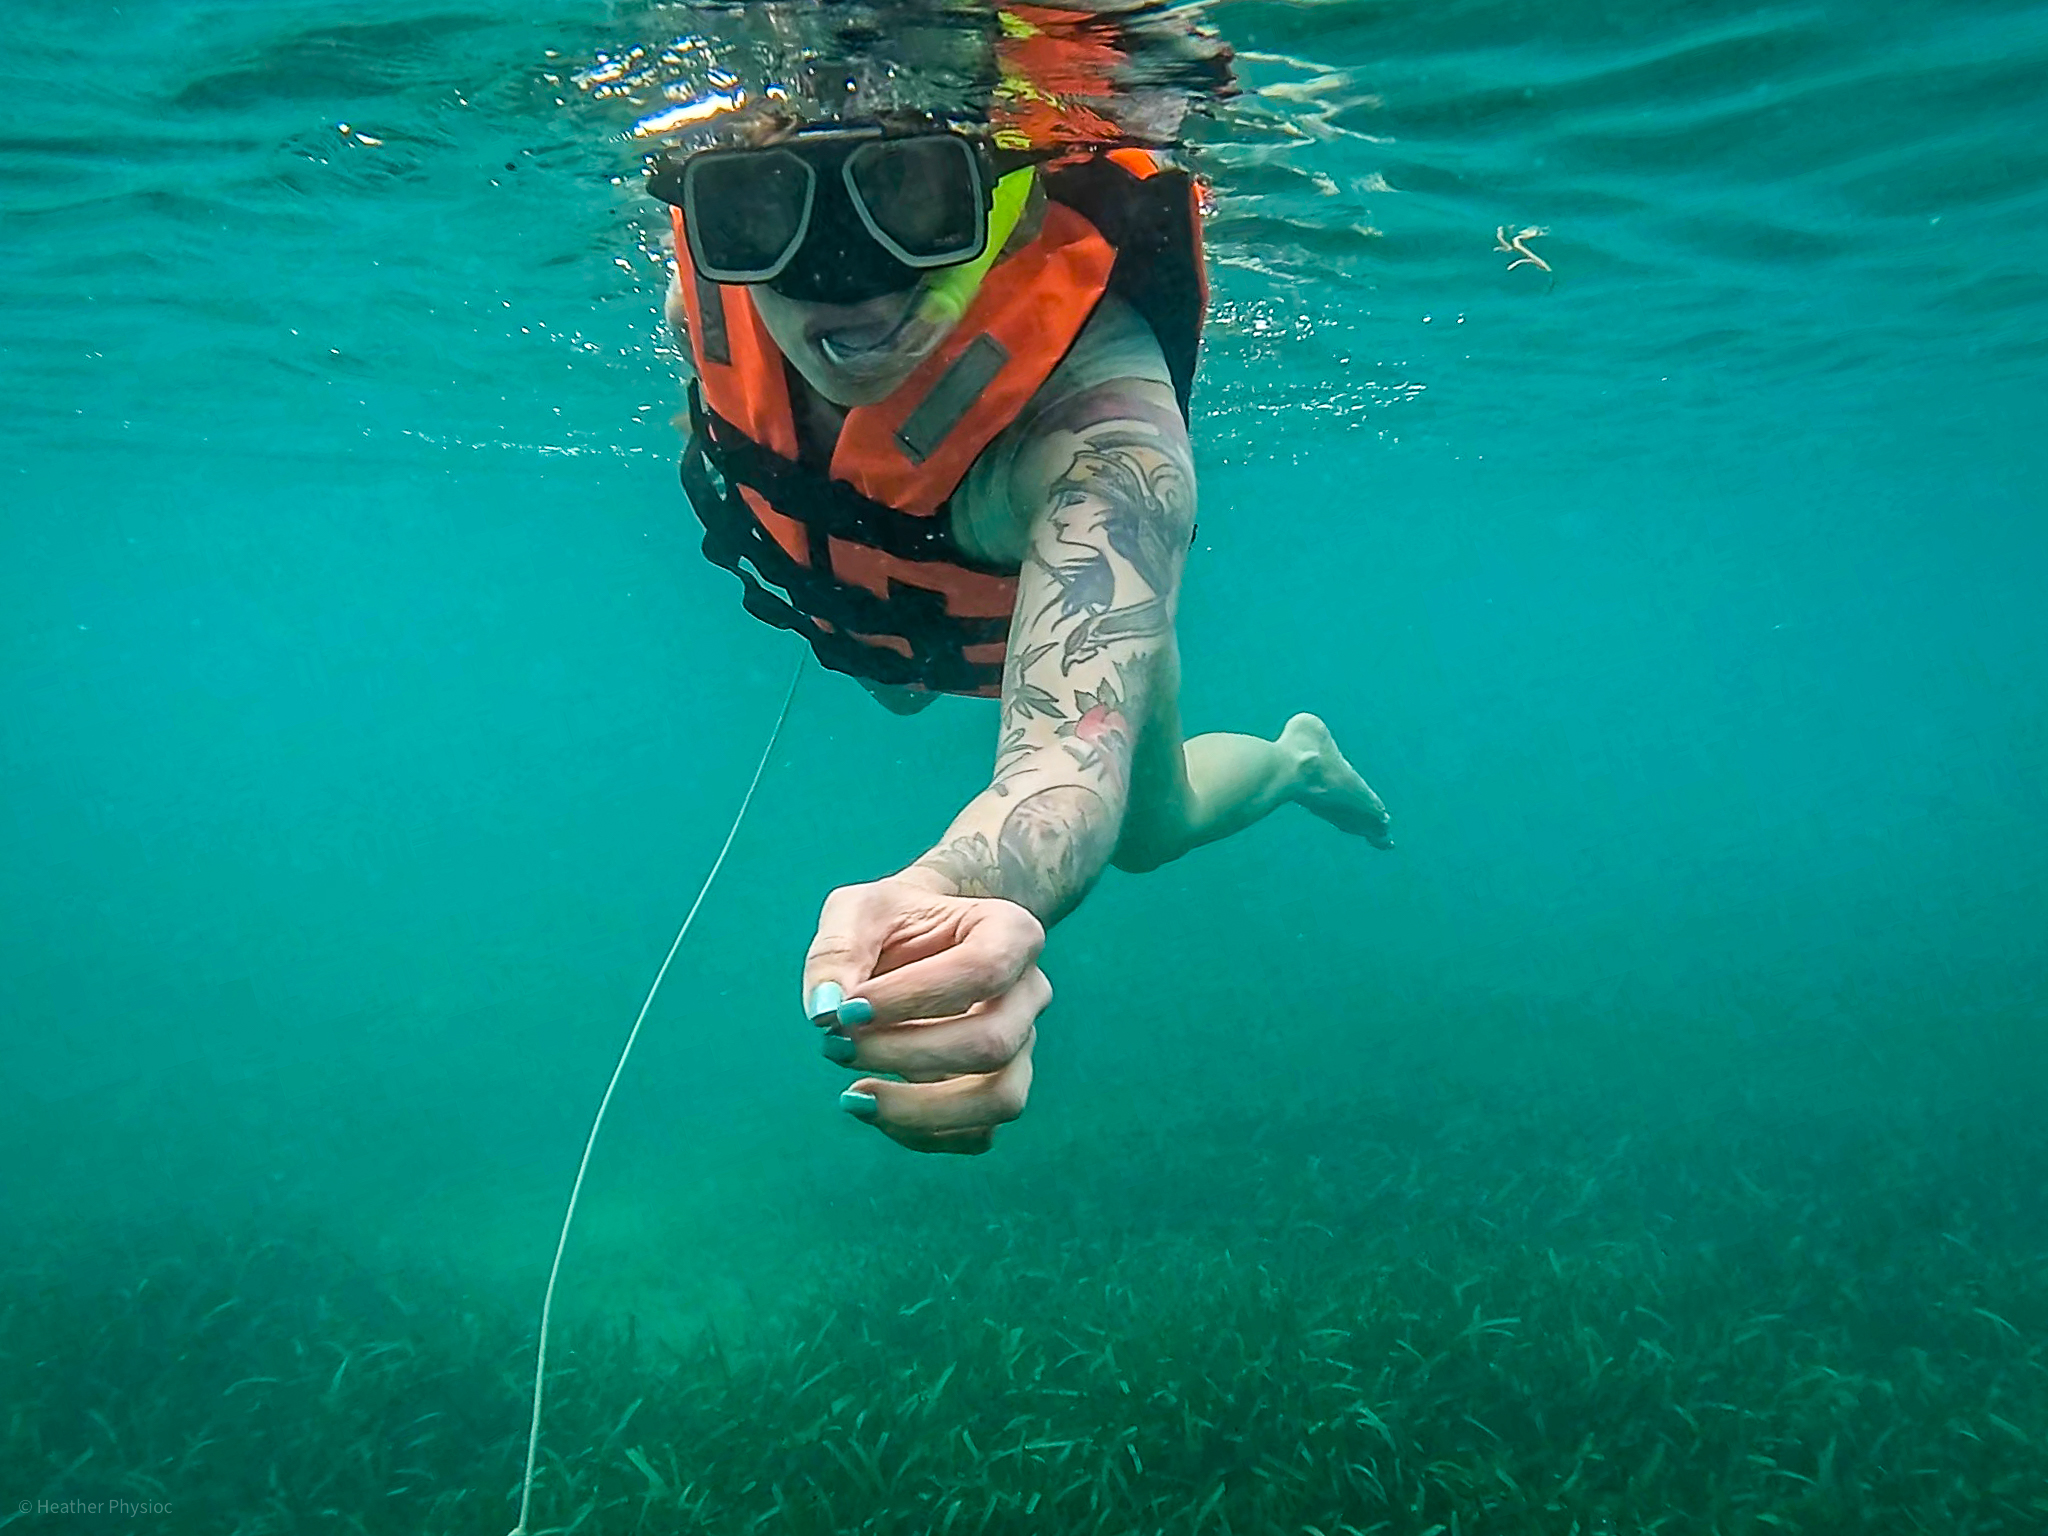 Conservation writer Heather Physioc snorkeling in the Akumal Bay in Yucatan, Mexico